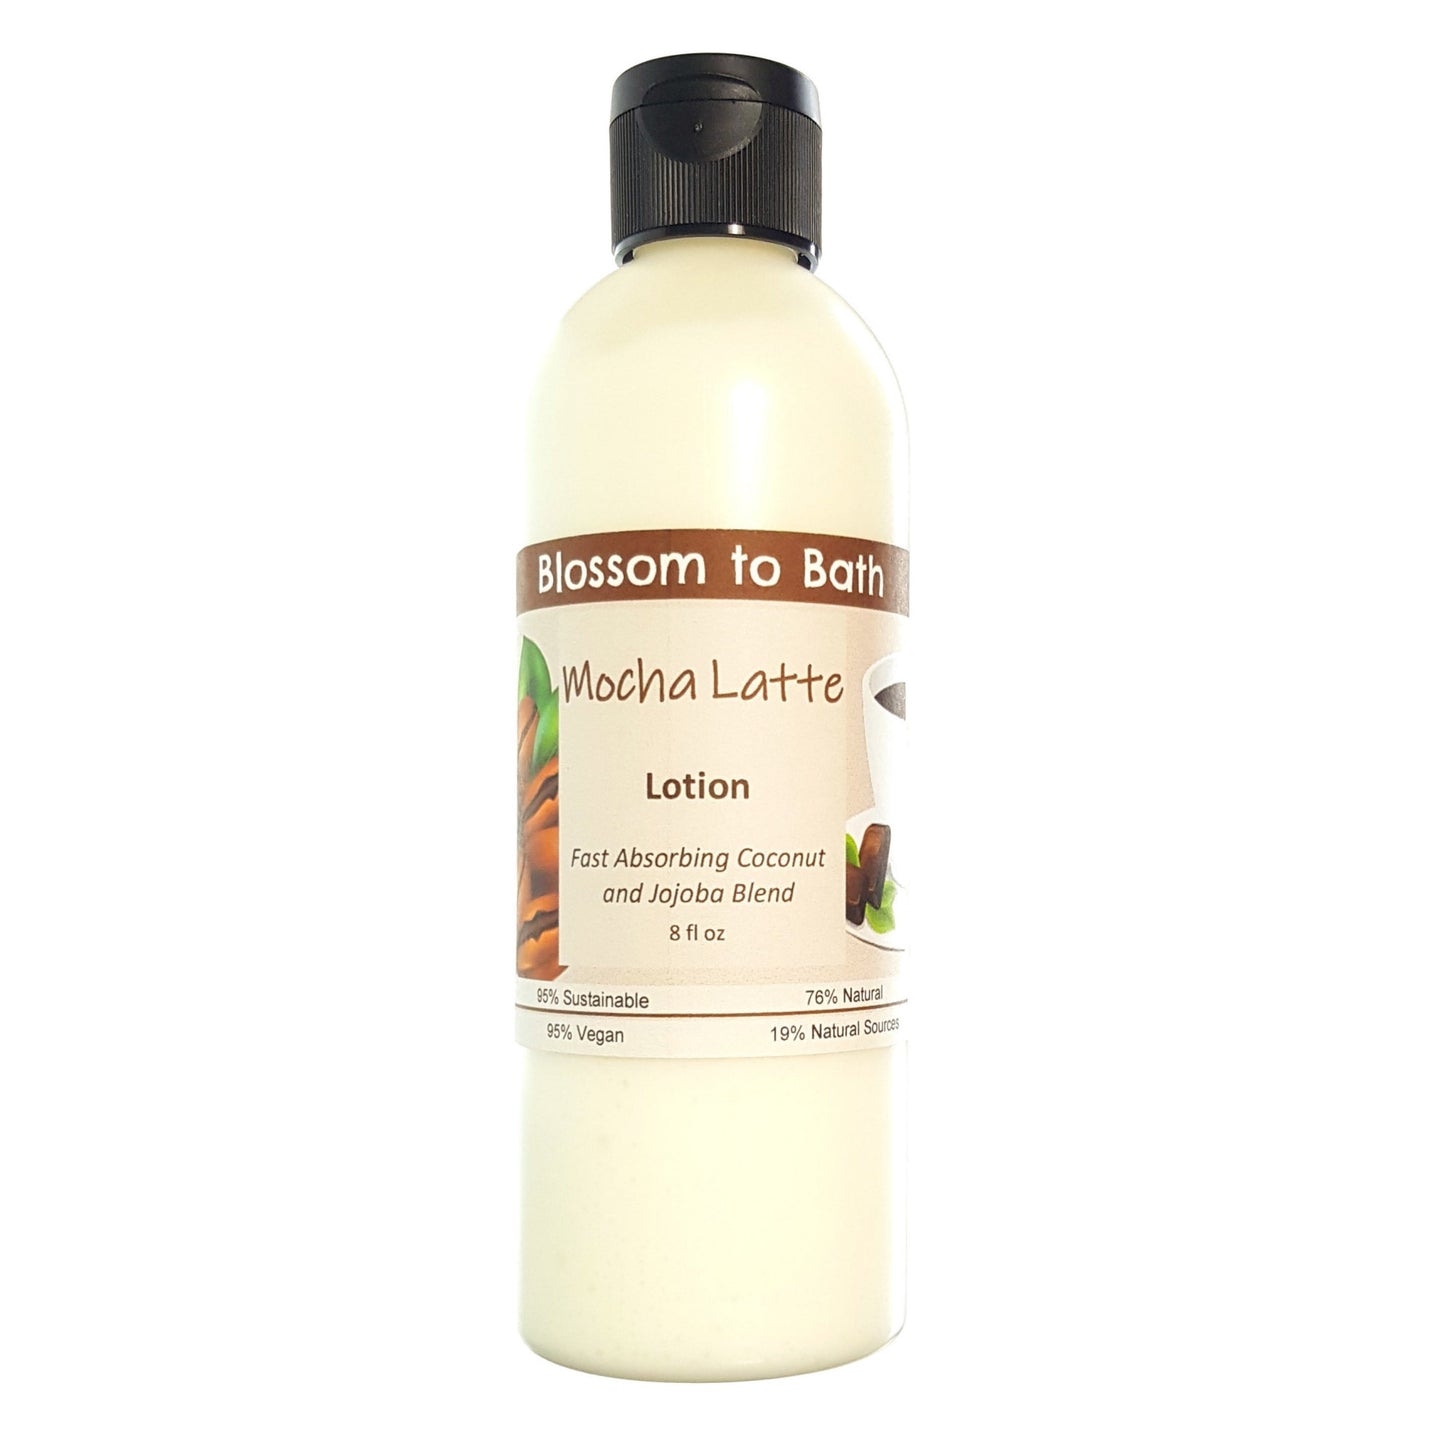 Buy Blossom to Bath Mocha Latte Lotion from Flowersong Soap Studio.  Daily moisture  that soaks in quickly made with organic oils and butters that soften and smooth the skin  Deep rich chocolate and fragrant coffee combine to form this gourmet coffee smell-alike scent.